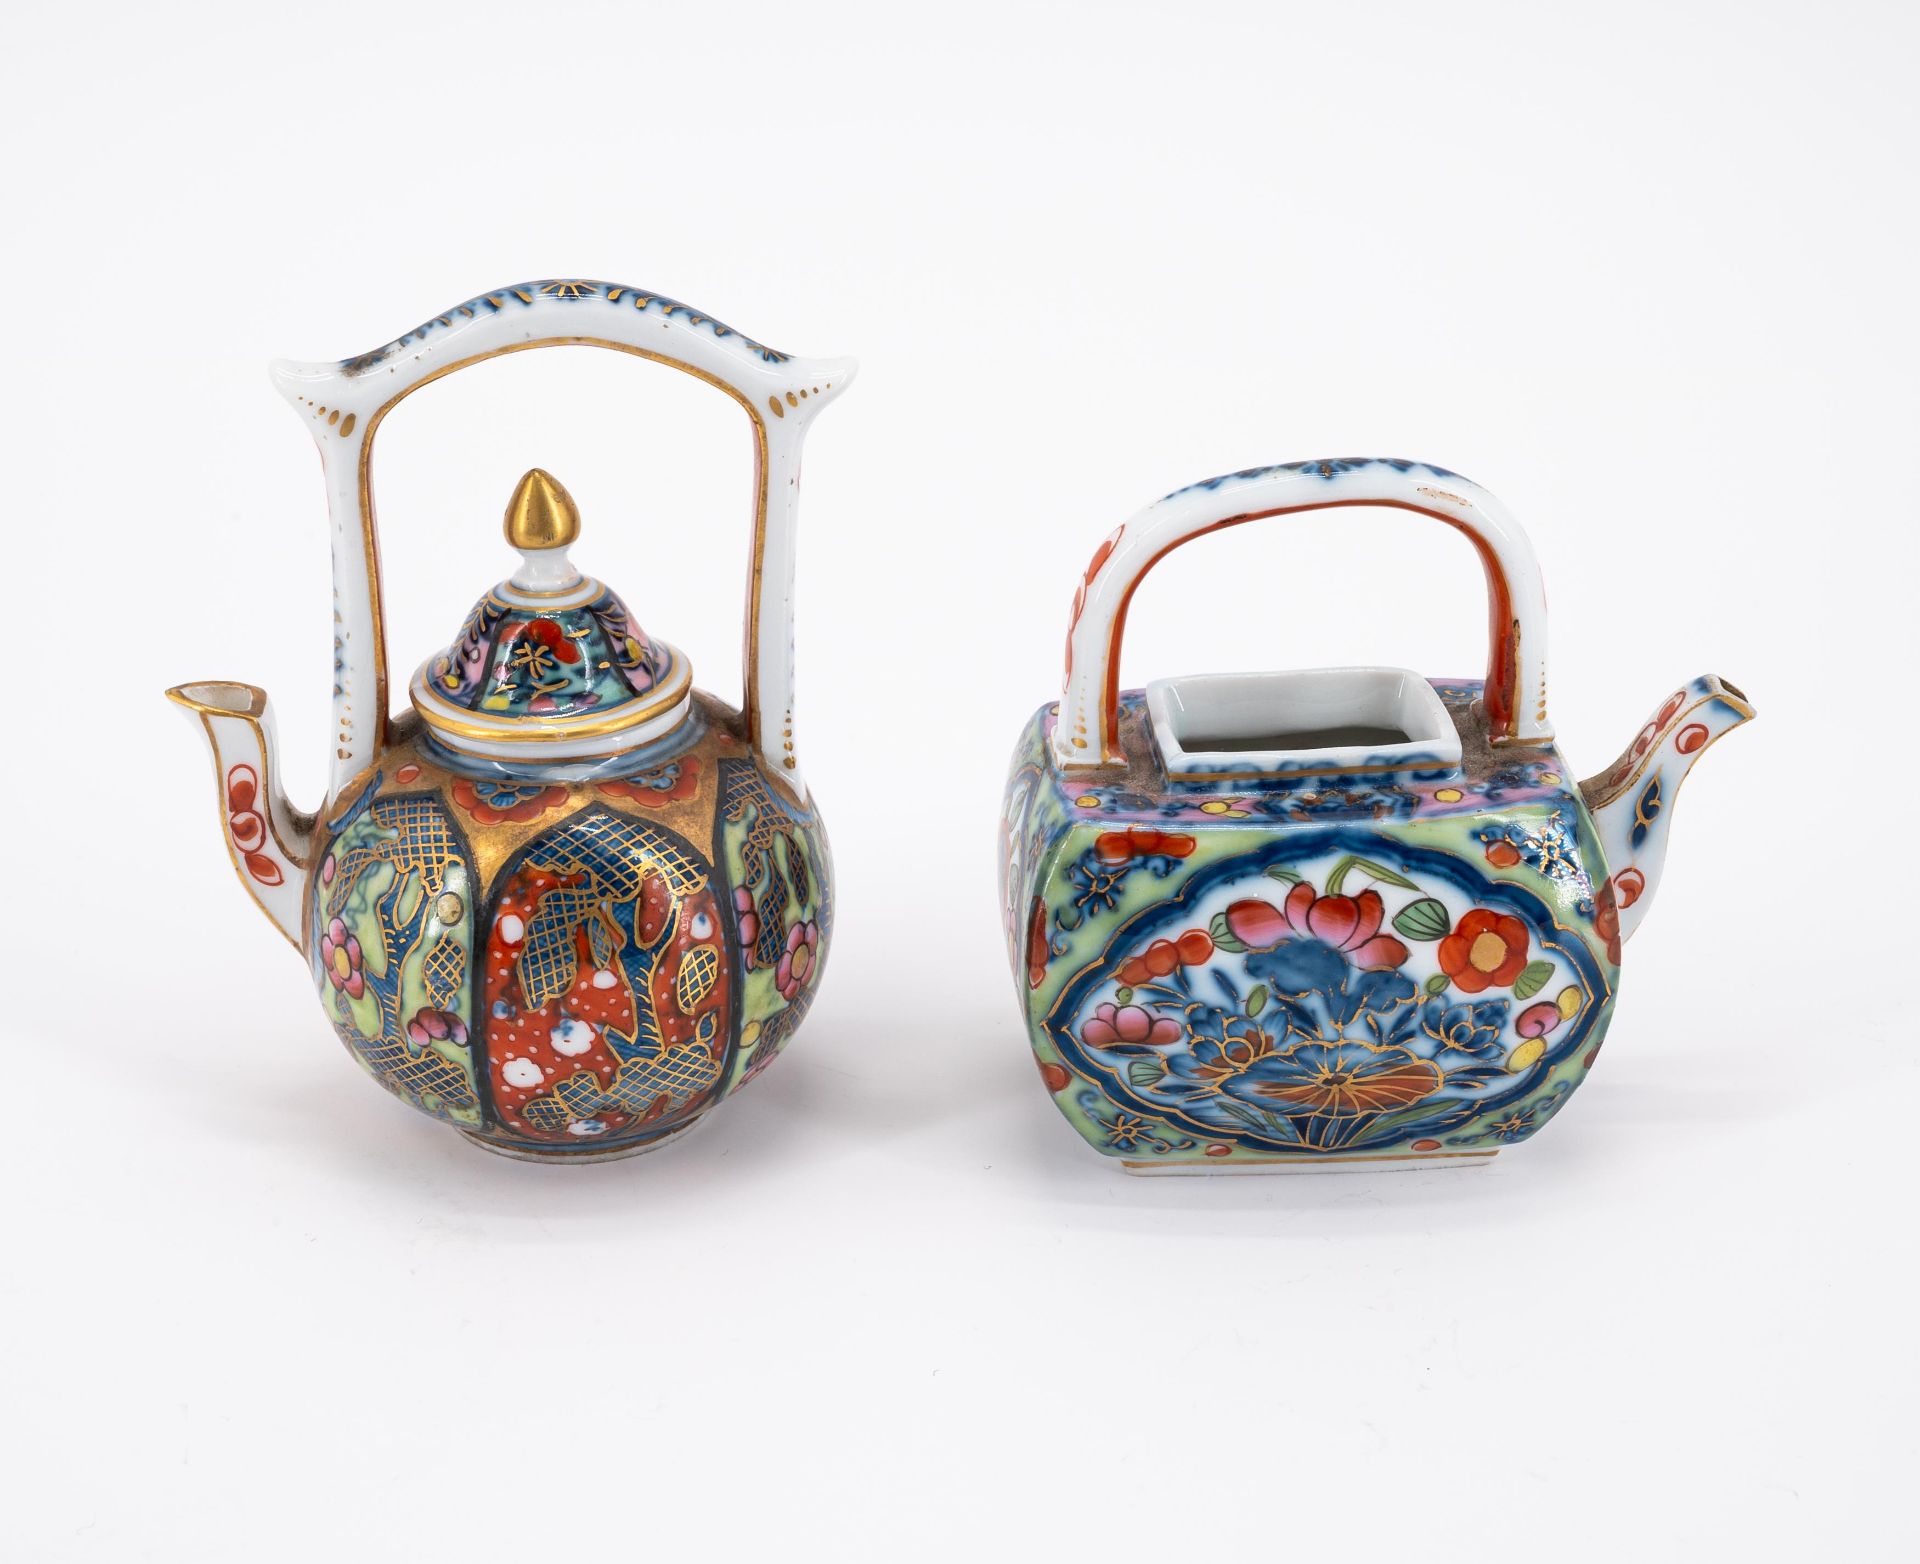 Meissen: ENSEMBLE OF TWO SMALL PORCELAIN TEA POTS IN THE IMARI STYLE - Image 2 of 5